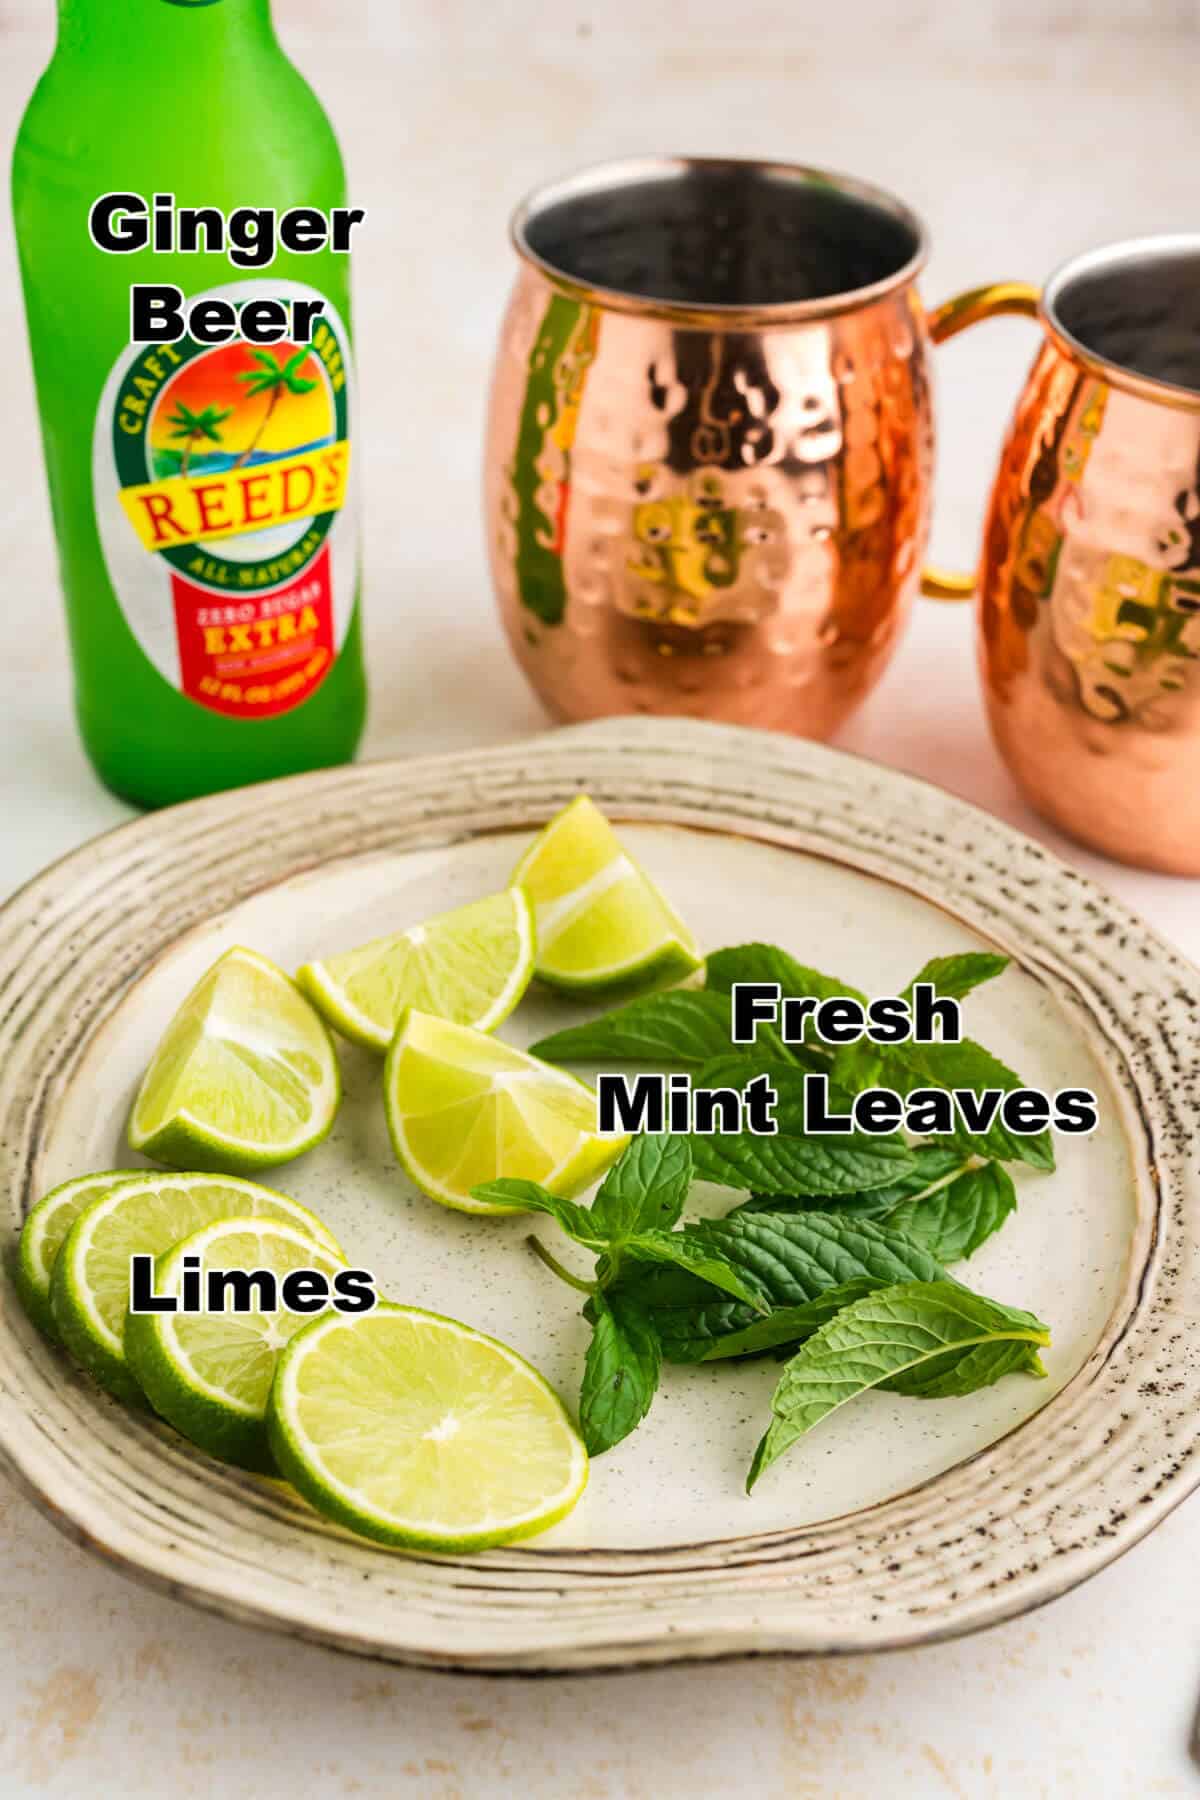 Ingredients to make a virgin Moscow Mule.